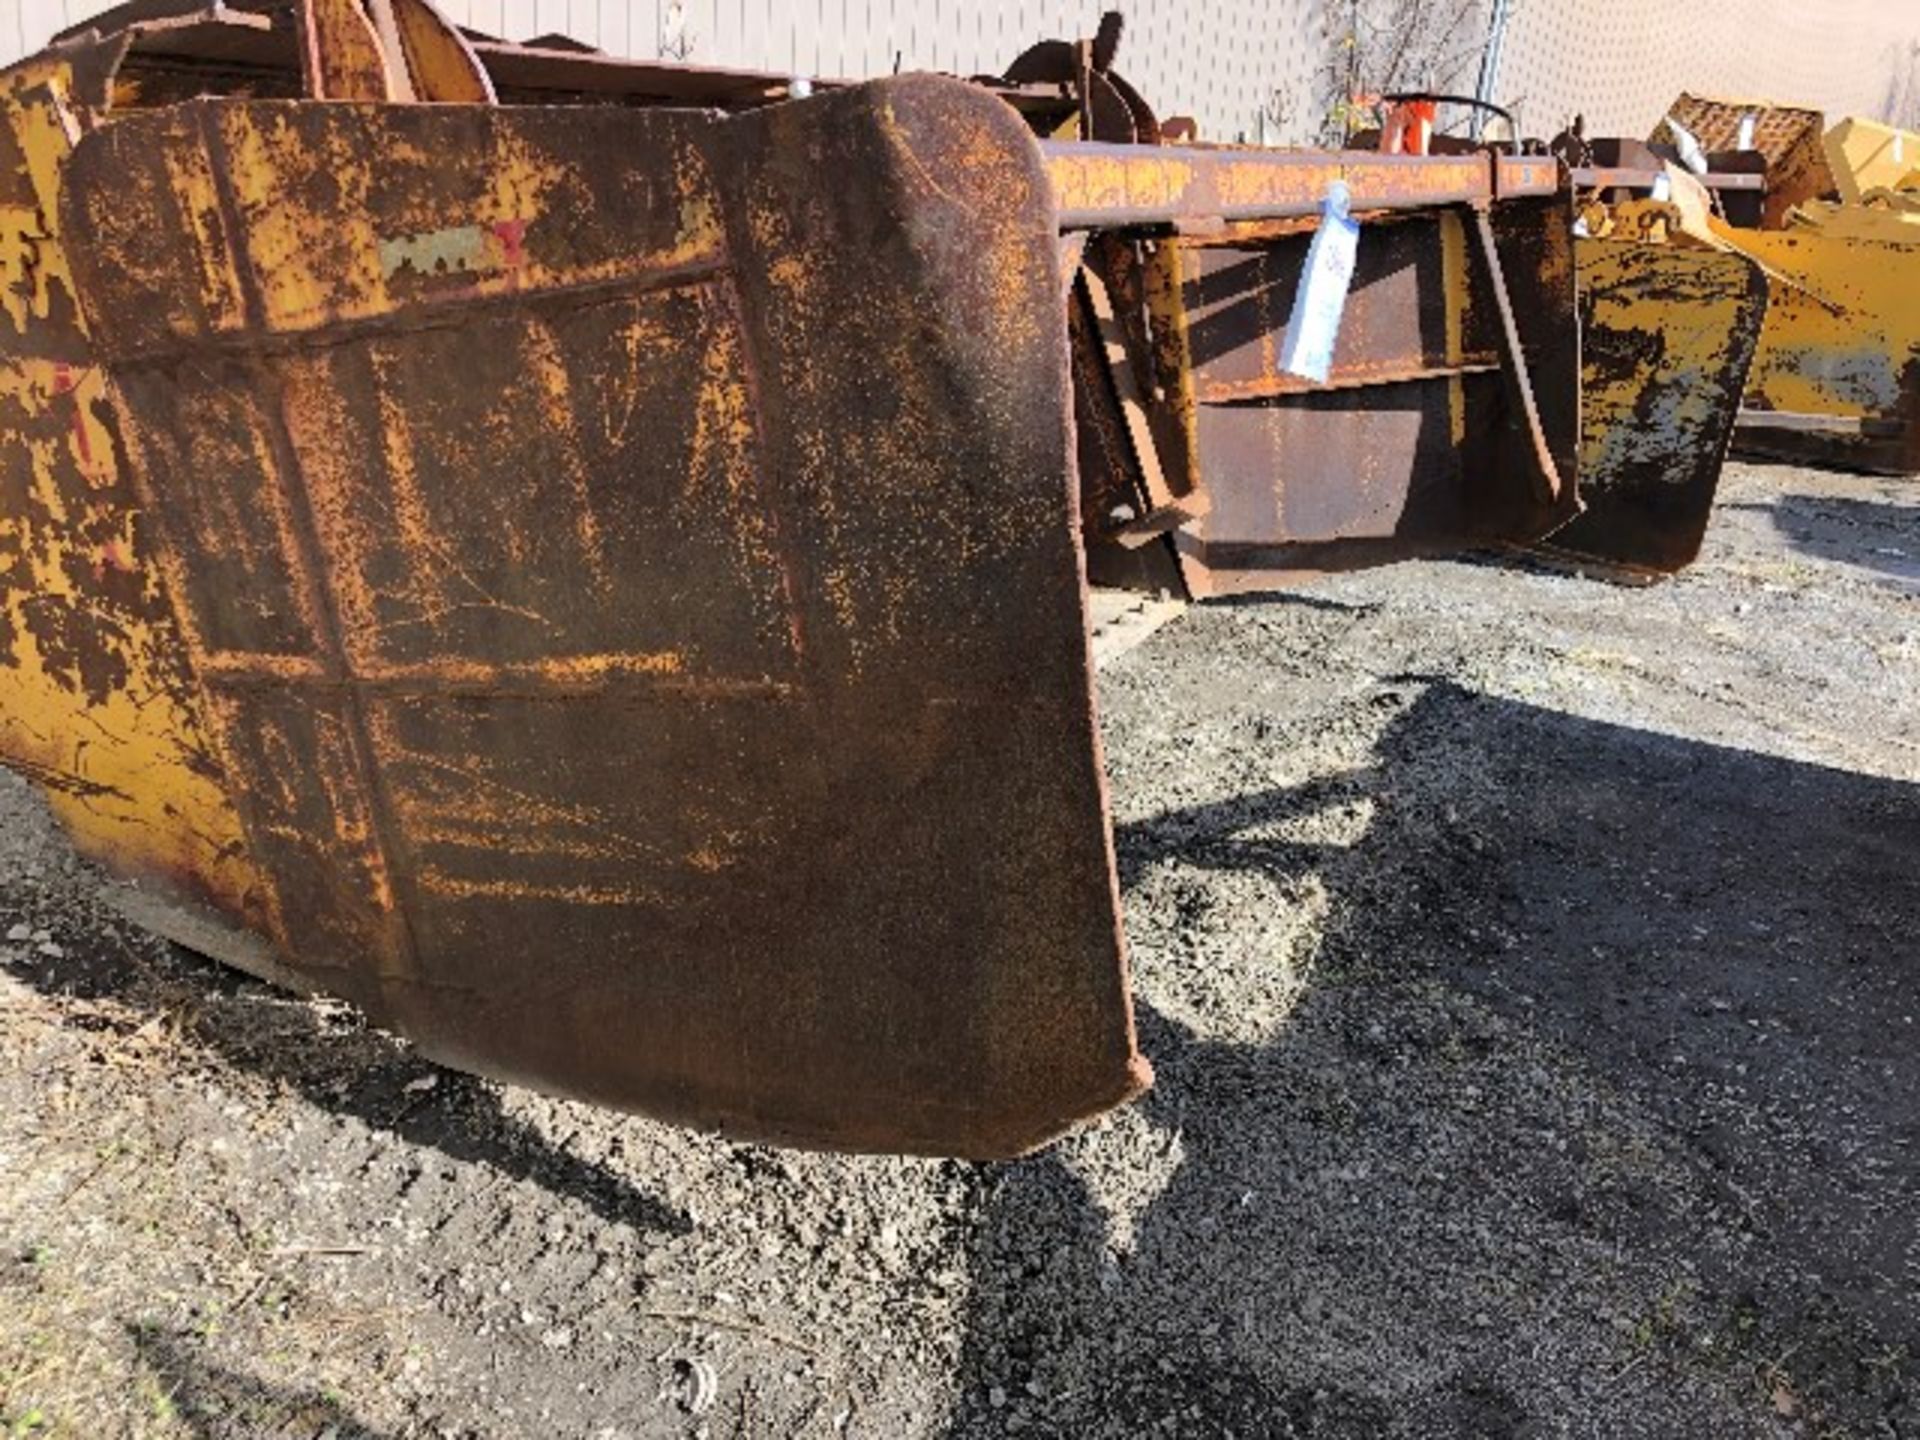 Plow attachment, approx. 140”